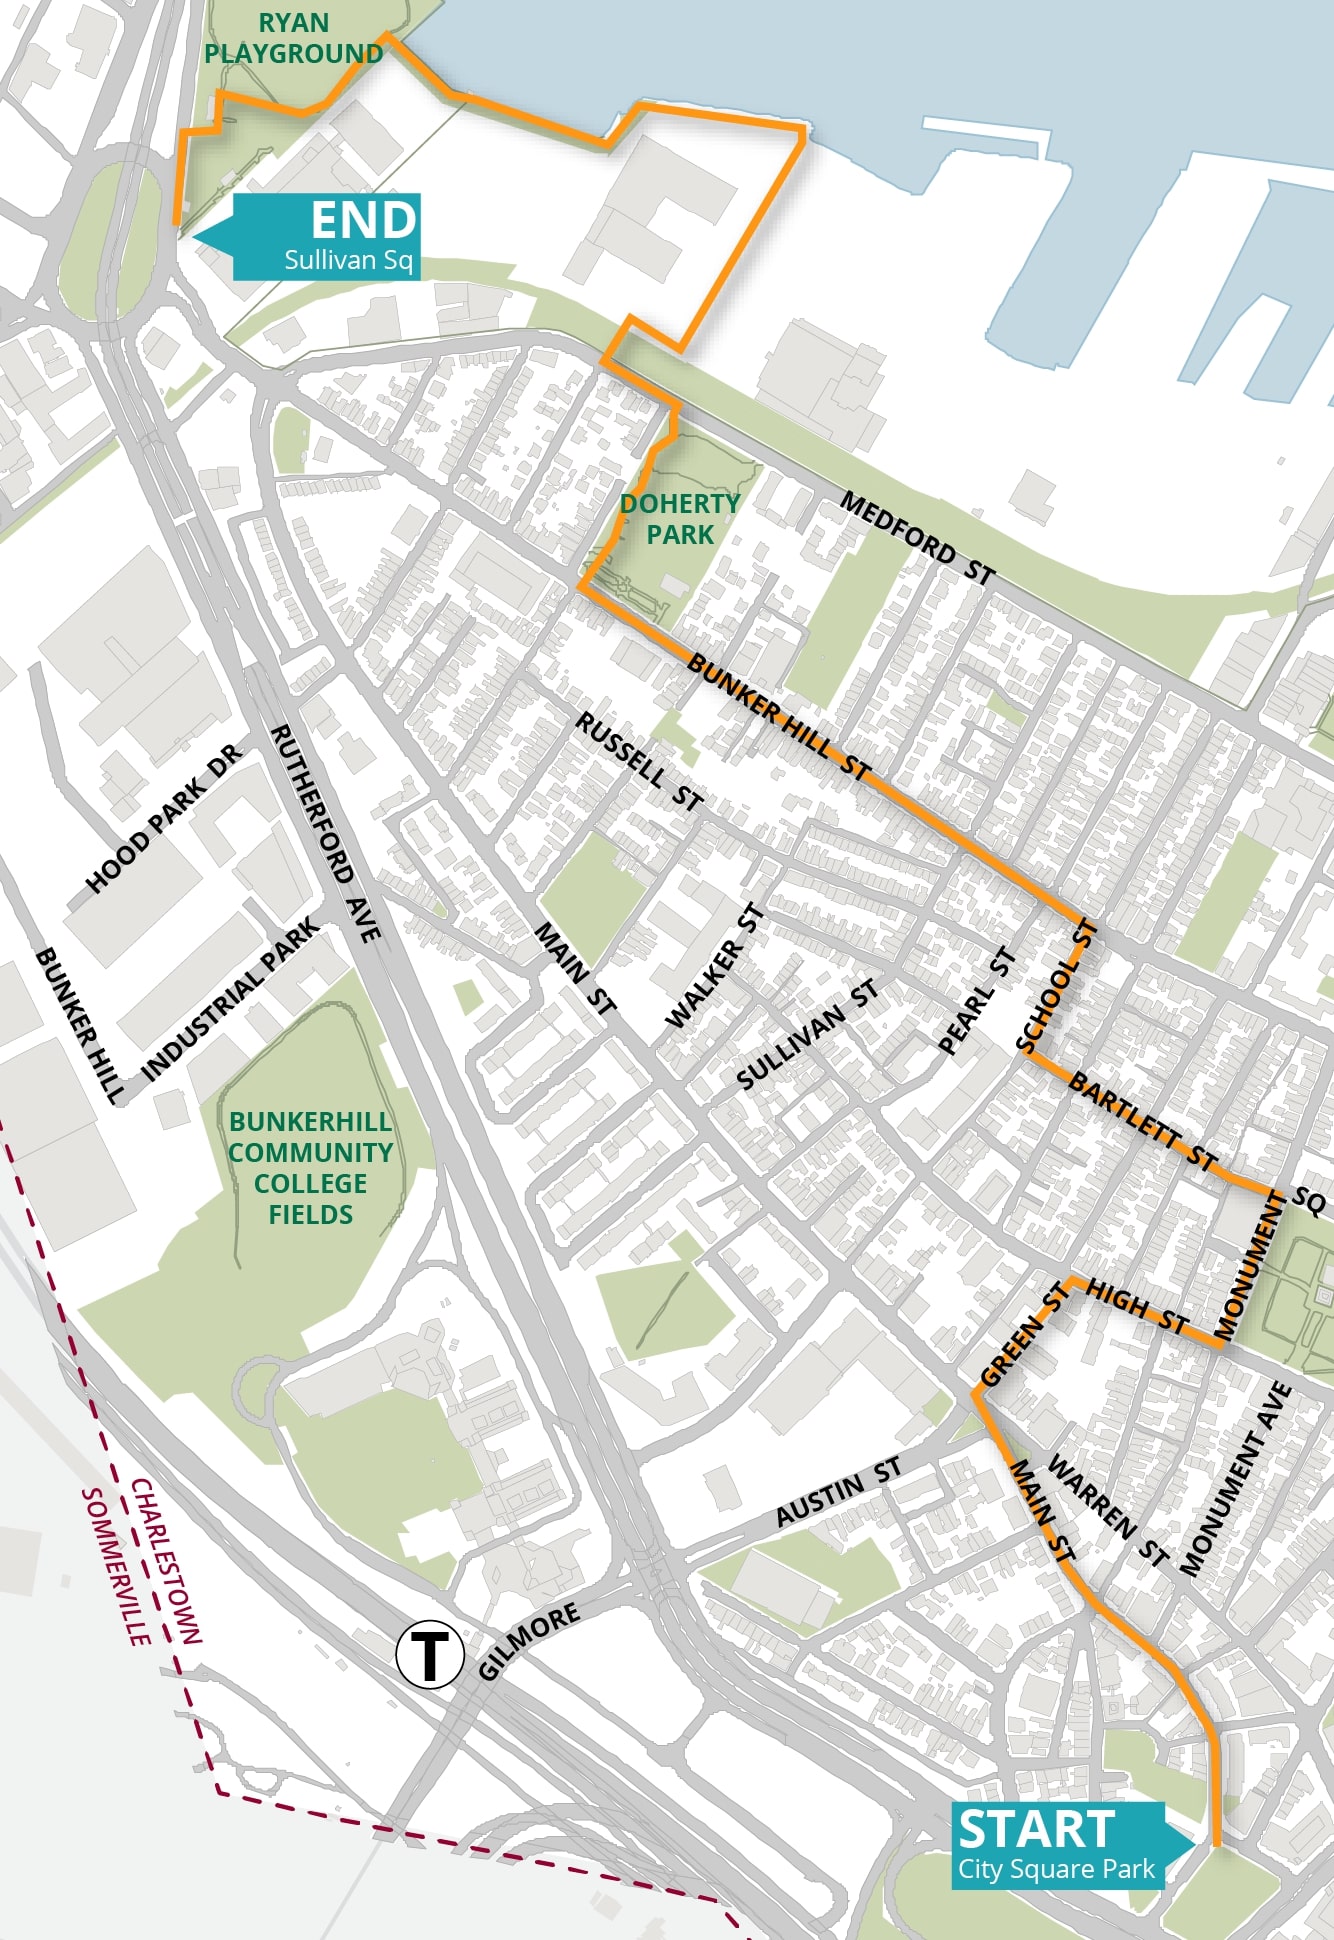 PLAN Charlestown Walking Tour route map from City Square to Sullivan Square